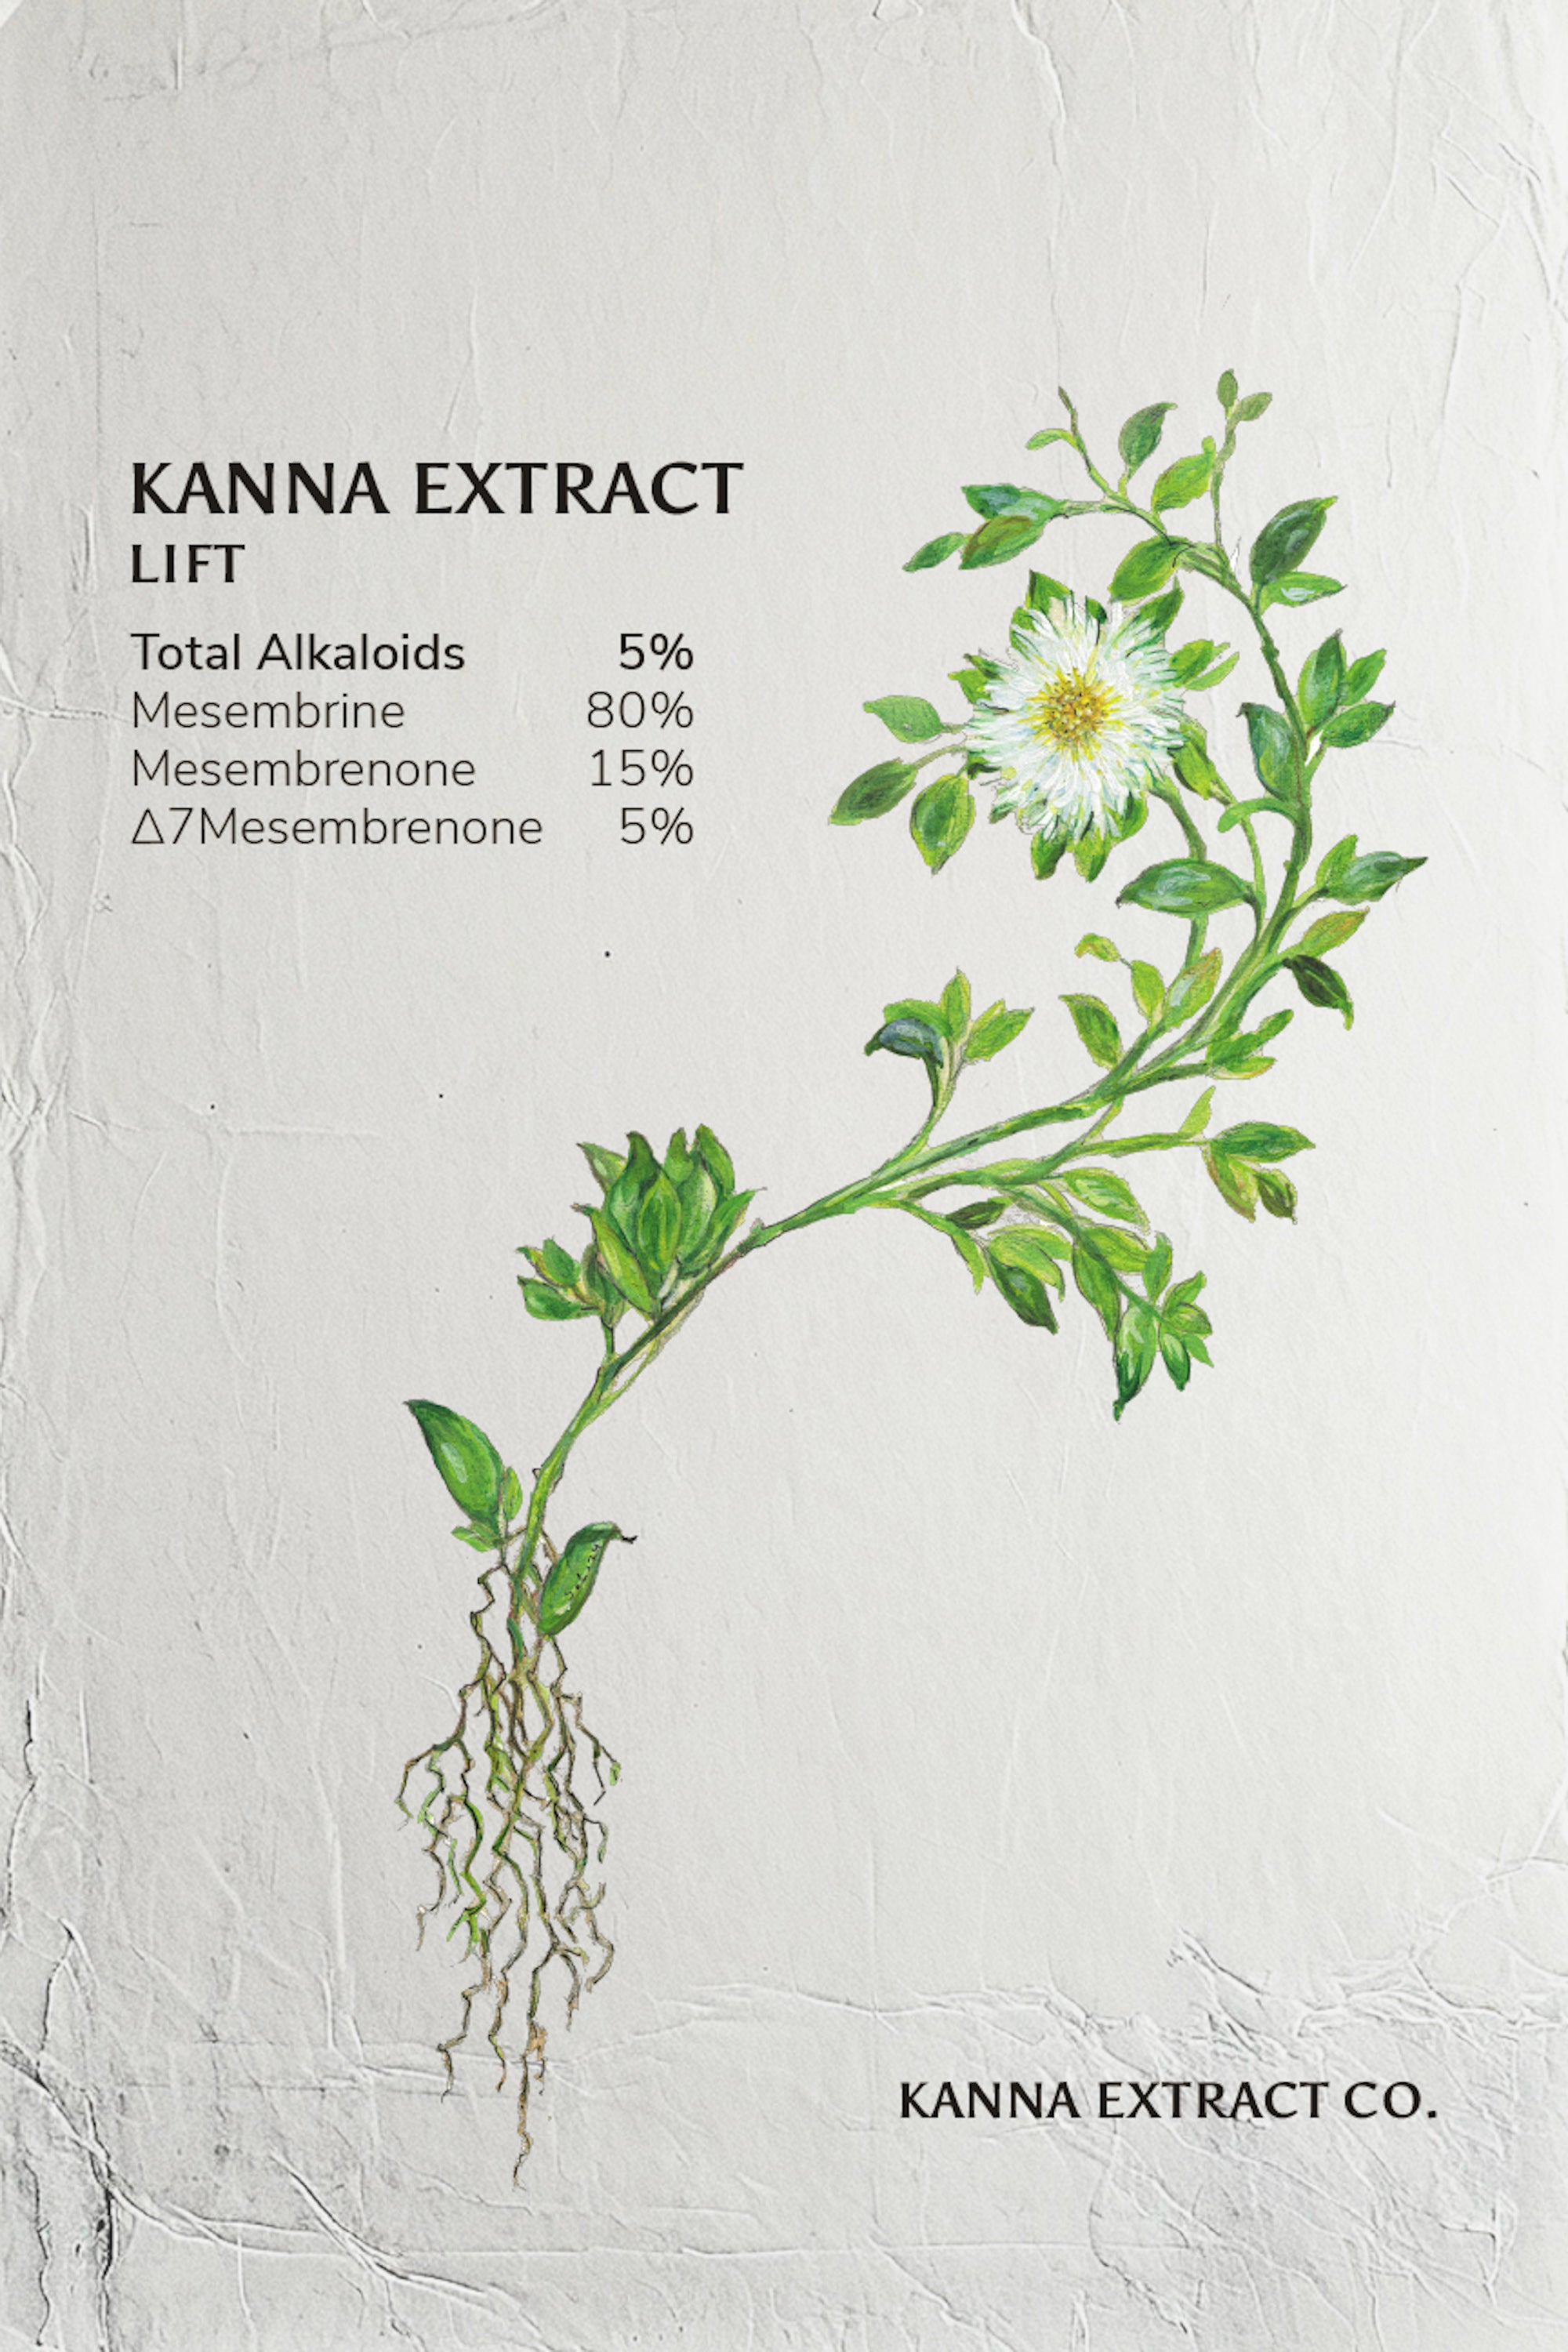 Image of the front packag label for the kanna extract company lift kanna extract made from organic sceletium tortuosum. The label reads total alkaloids 5%, mesembrine 80%, Mesembrenone 15%, delta7mesembrenone 5%. This kanna extract is for sale for whole, bulk and retail distribution.